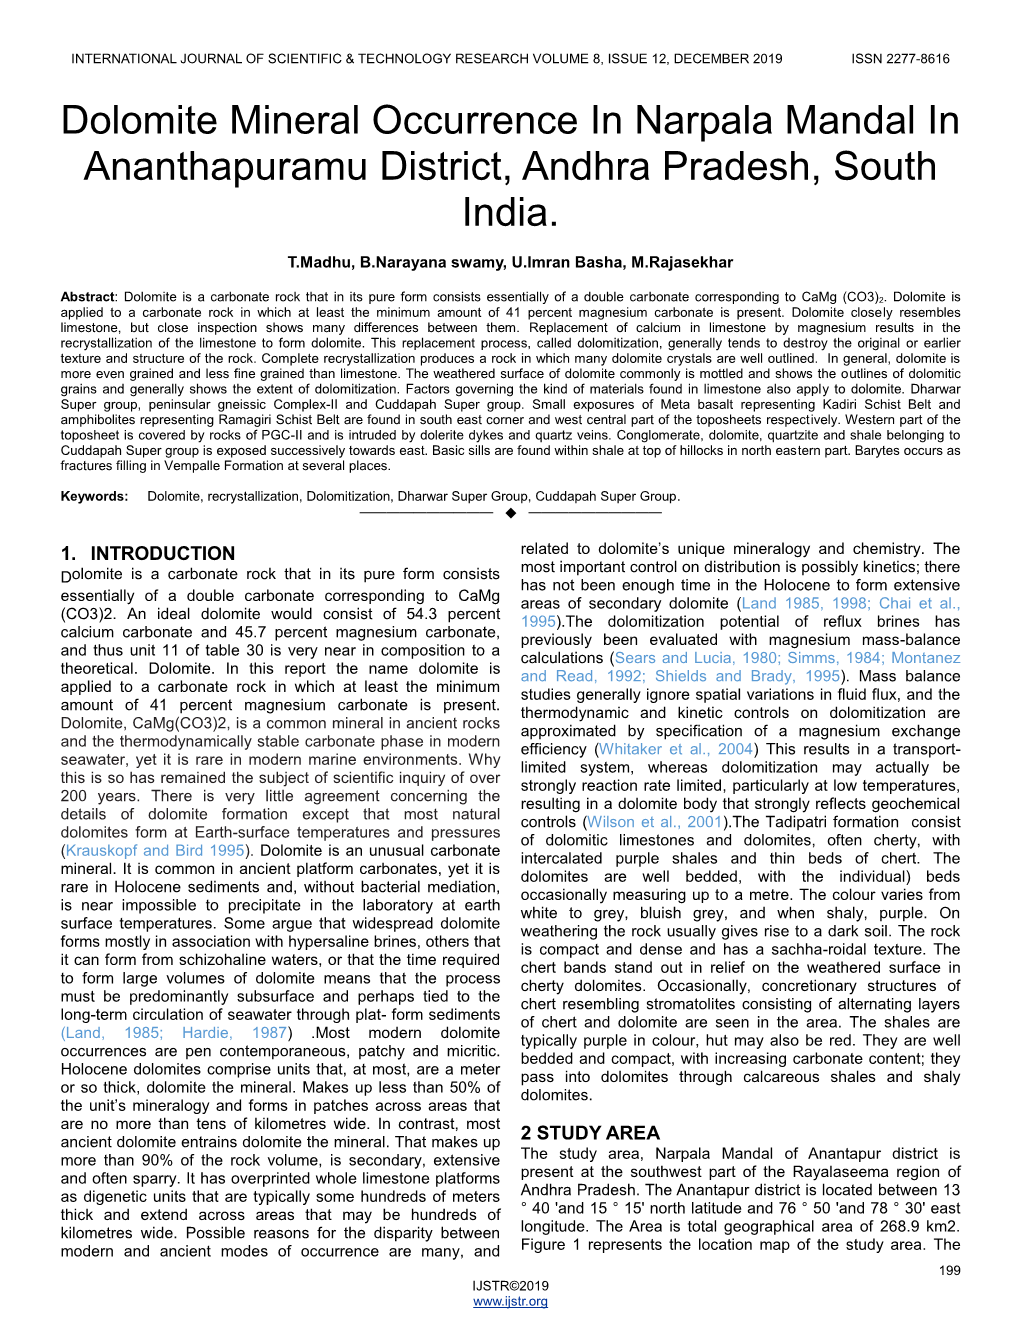 Dolomite Mineral Occurrence in Narpala Mandal in Ananthapuramu District, Andhra Pradesh, South India